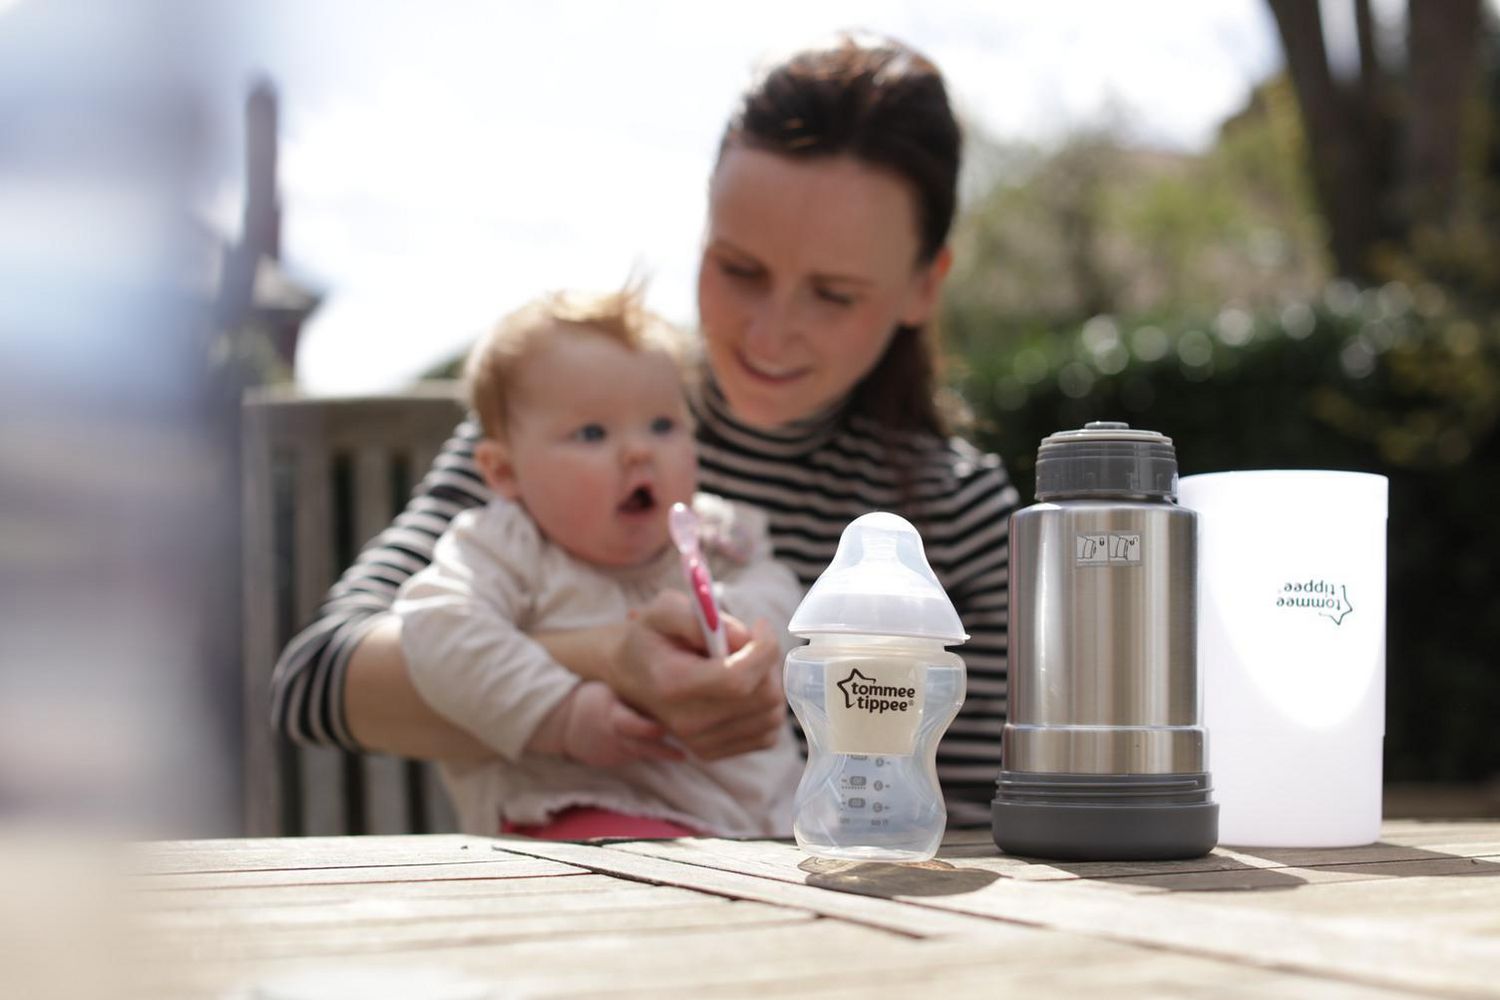 Thermos chauffe-biberon nomade, Tommee Tippee de Tommee Tippee